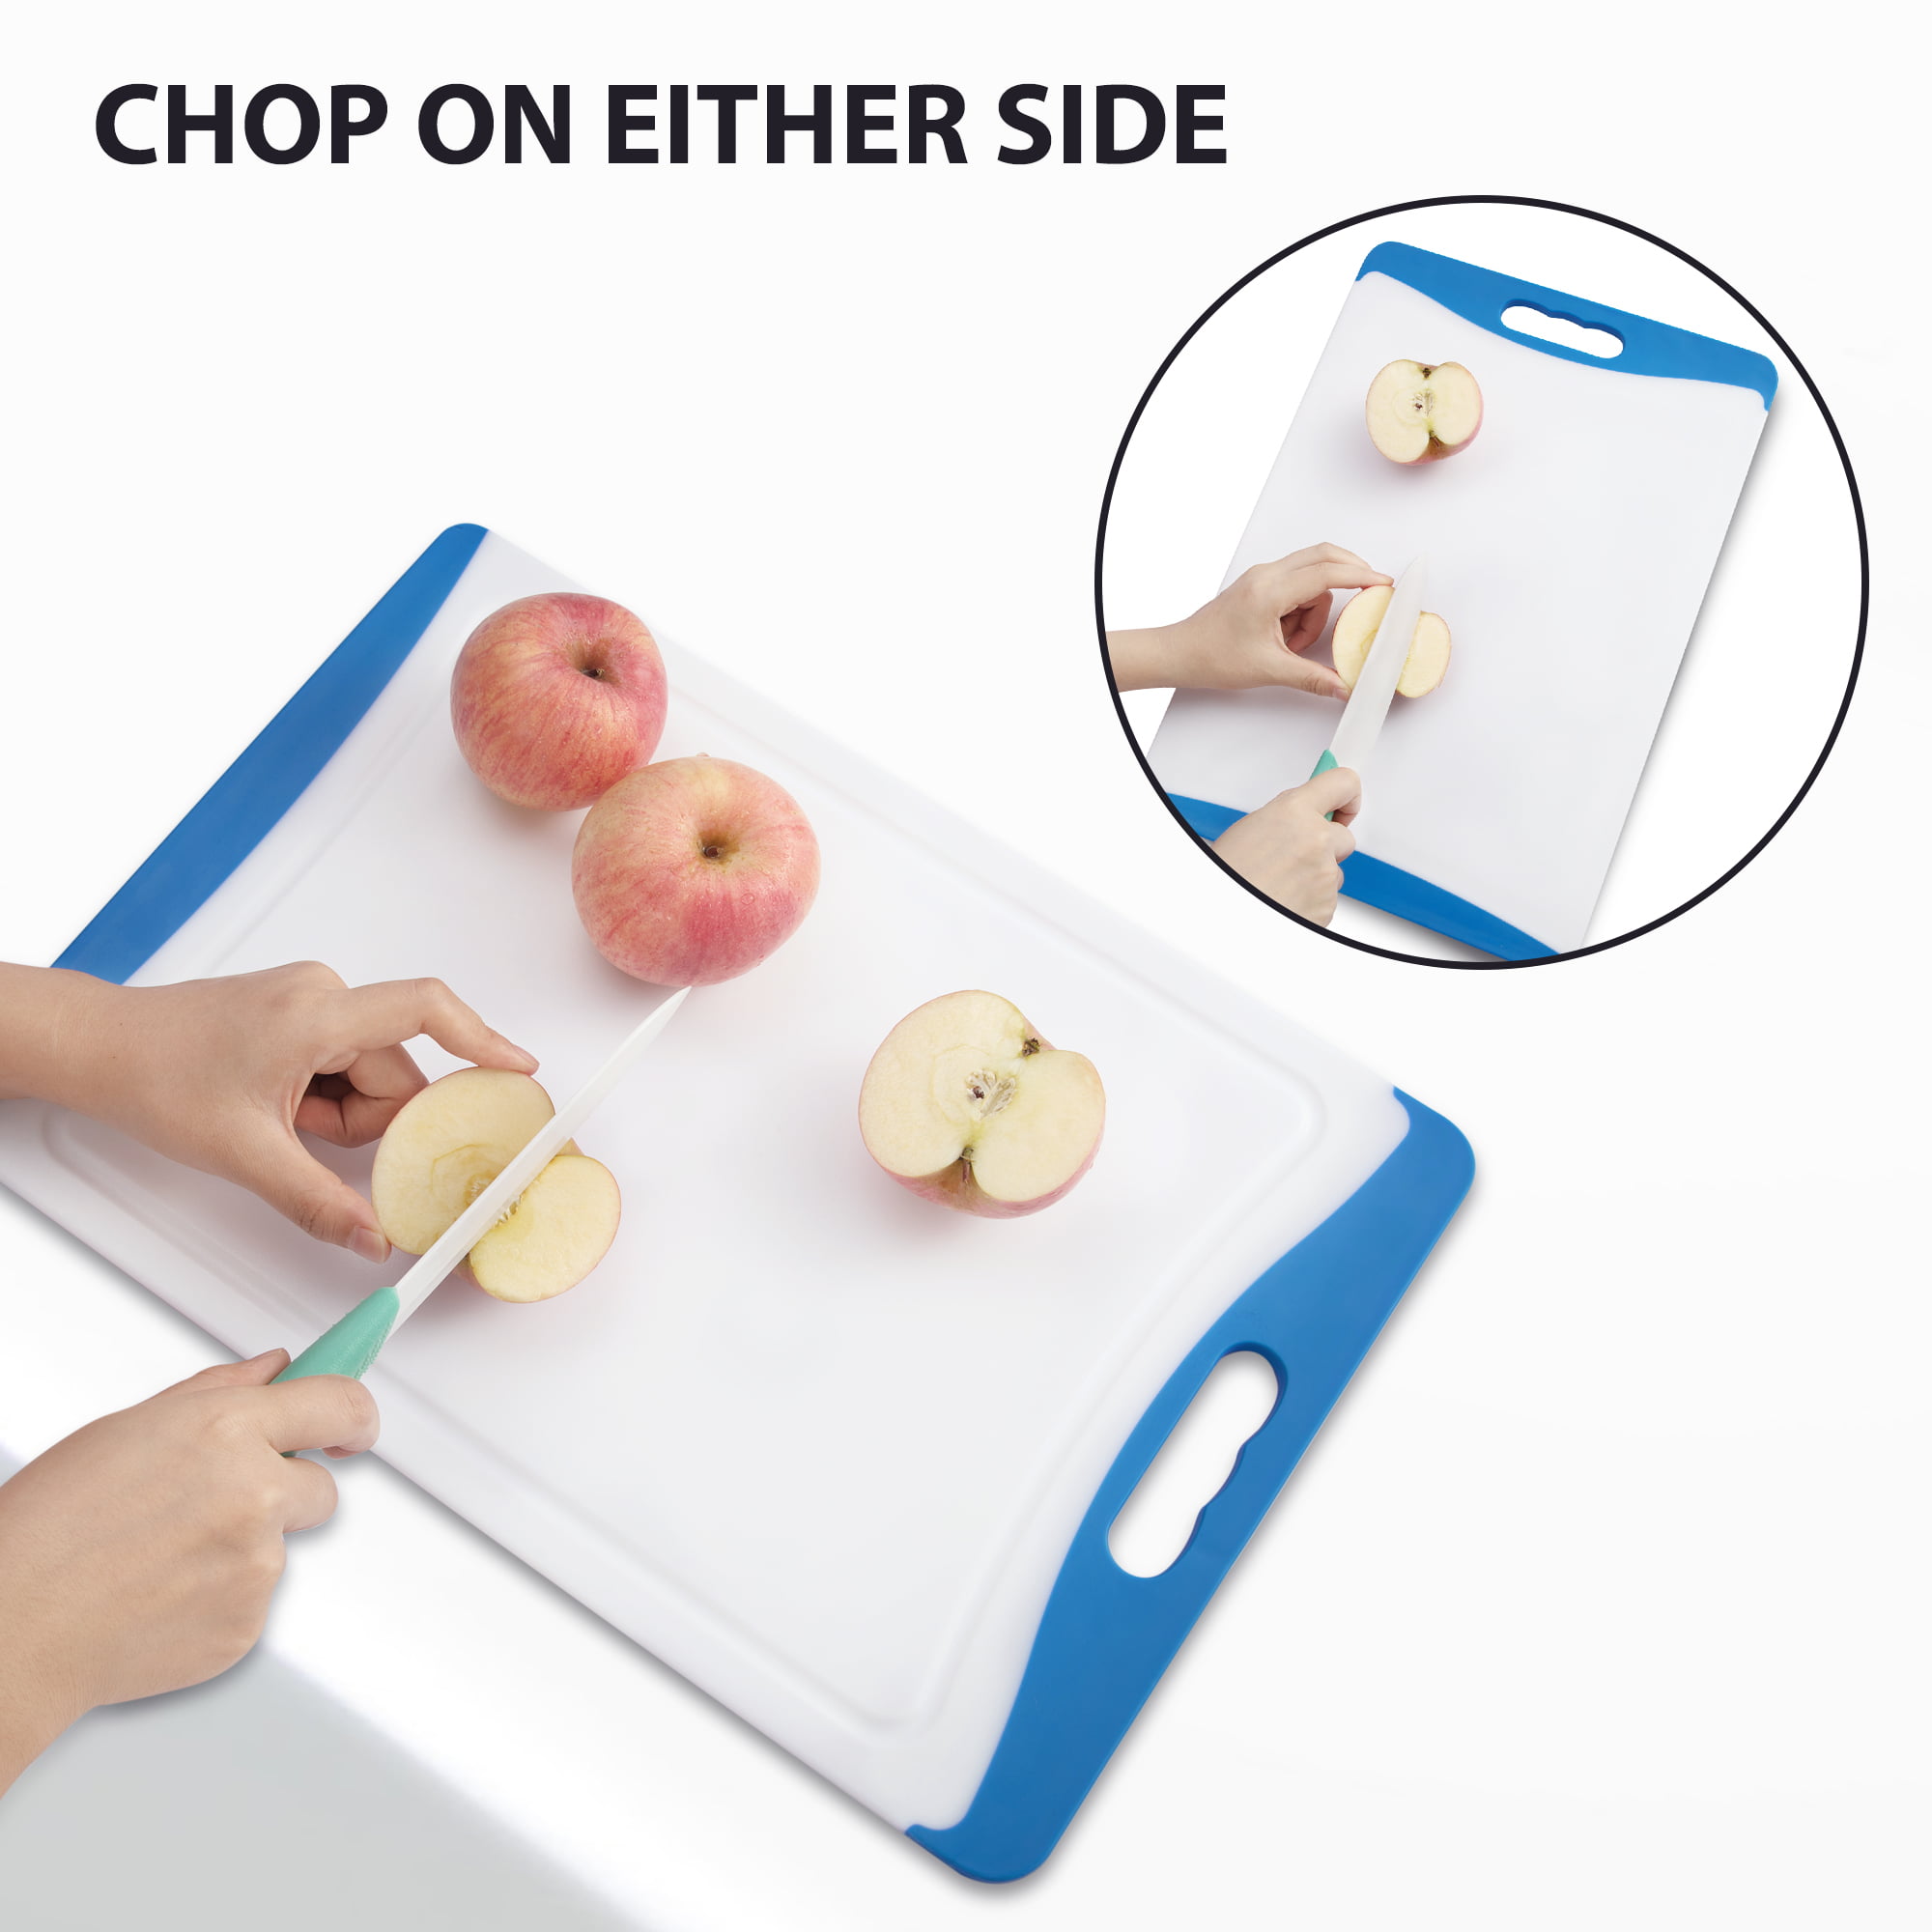 Cibeat Extra Large Cutting Board, Dishwasher Safe Chopping Boards with Juice Grooves and Easy Grip Handle, BPA Free, 3 Pieces Plastic Cutting Board